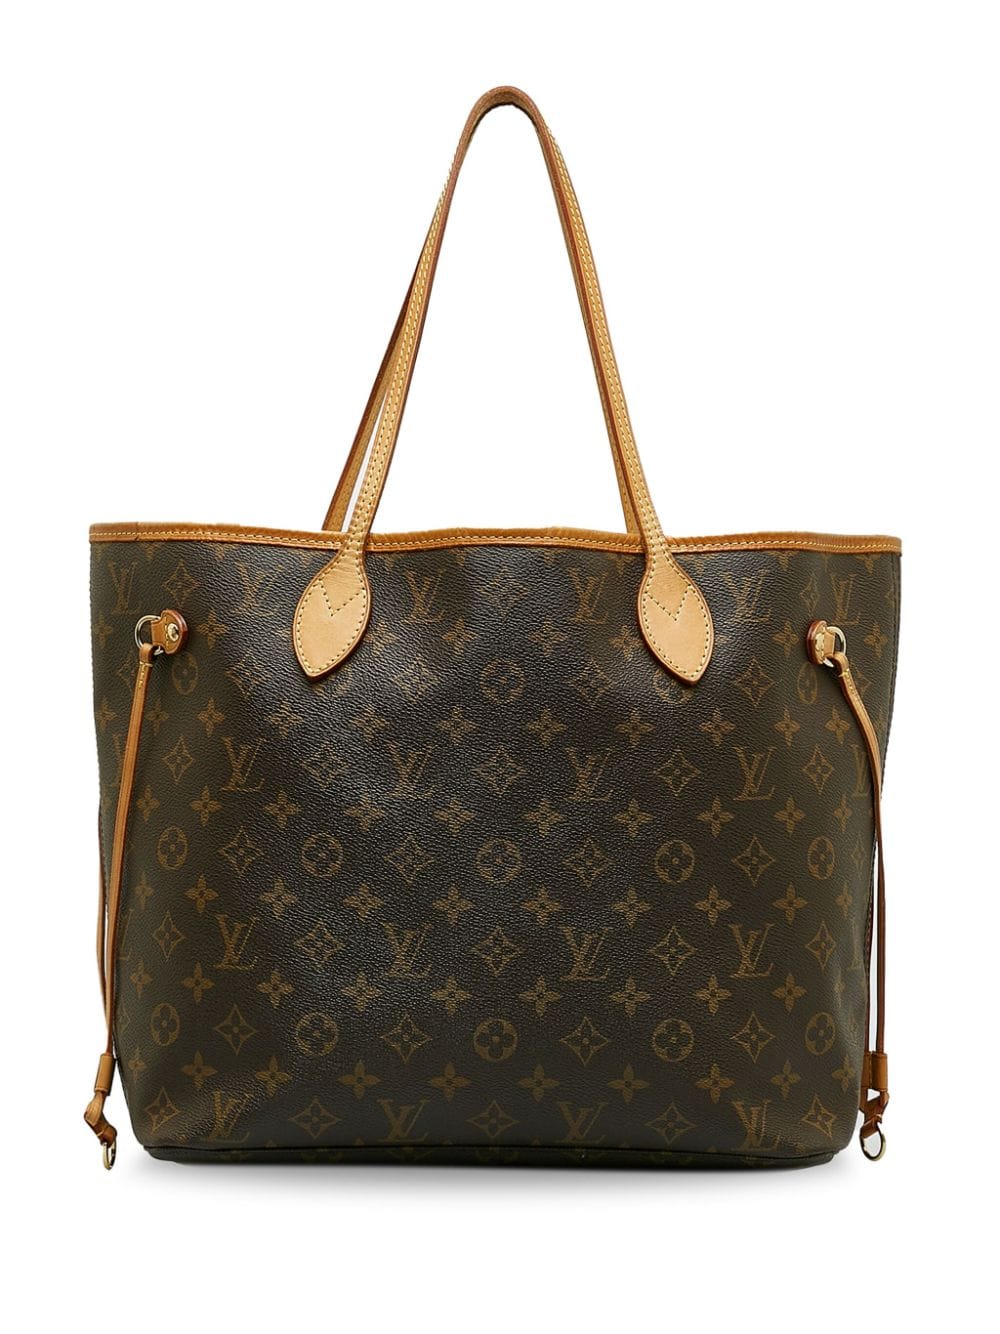 Pre-owned Louis Vuitton 2011 Neverfull Mm Tote Bag In Brown